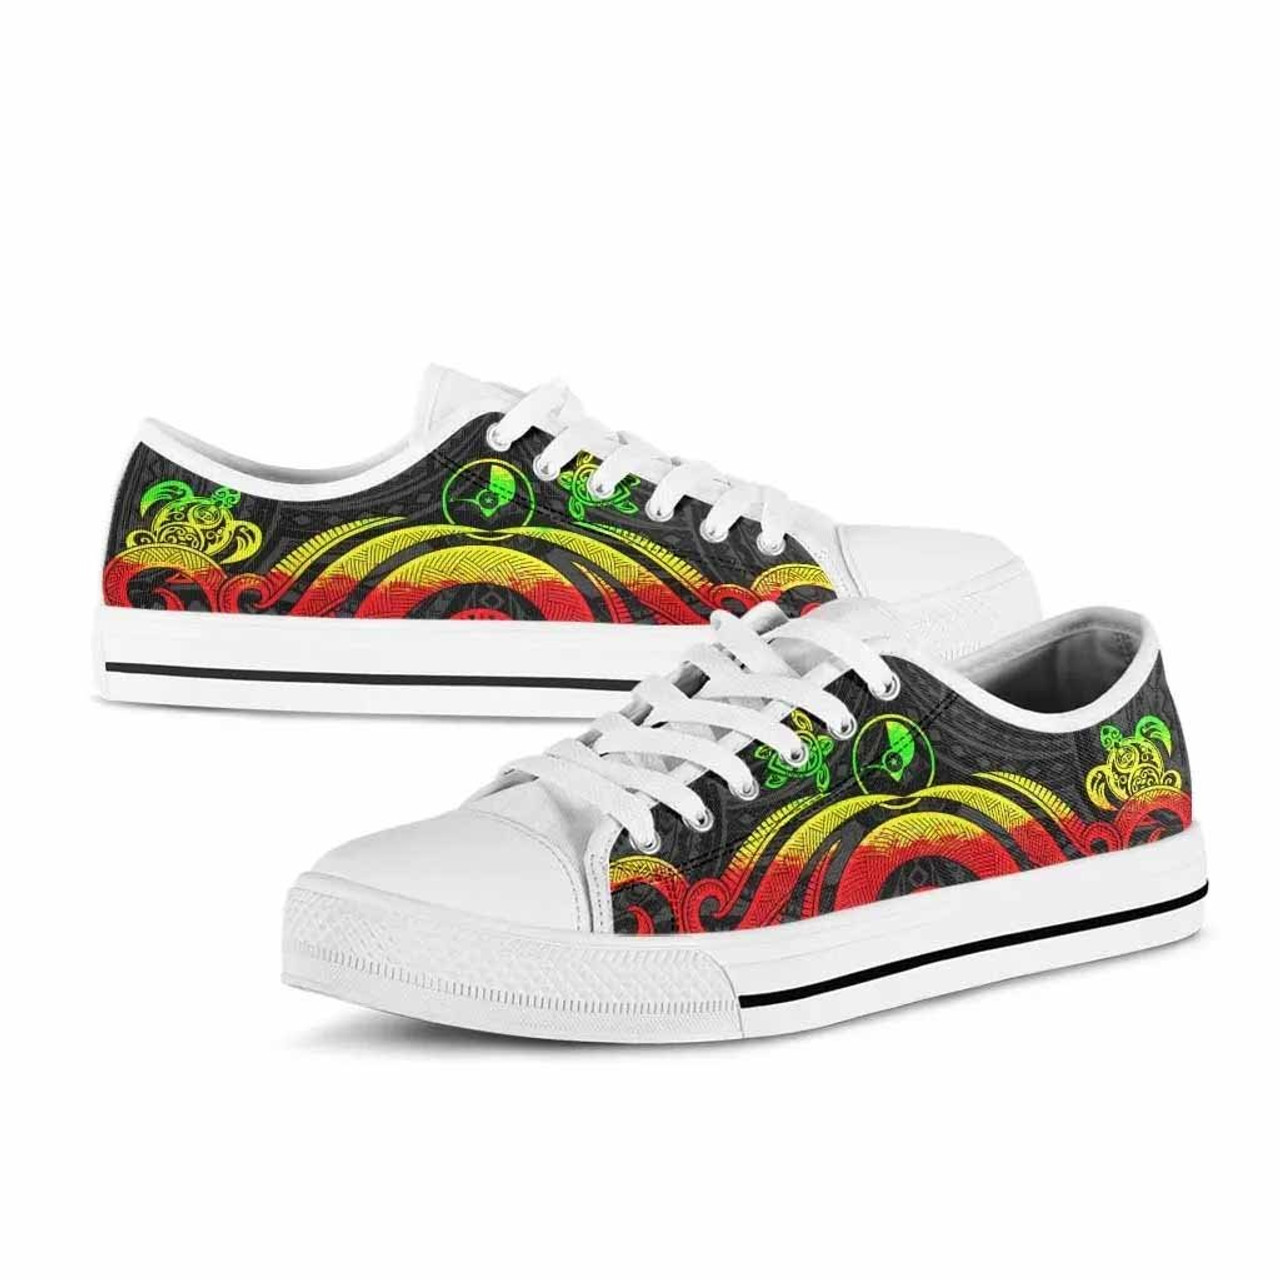 Yap Low Top Canvas Shoes - Reggae Tentacle Turtle 6